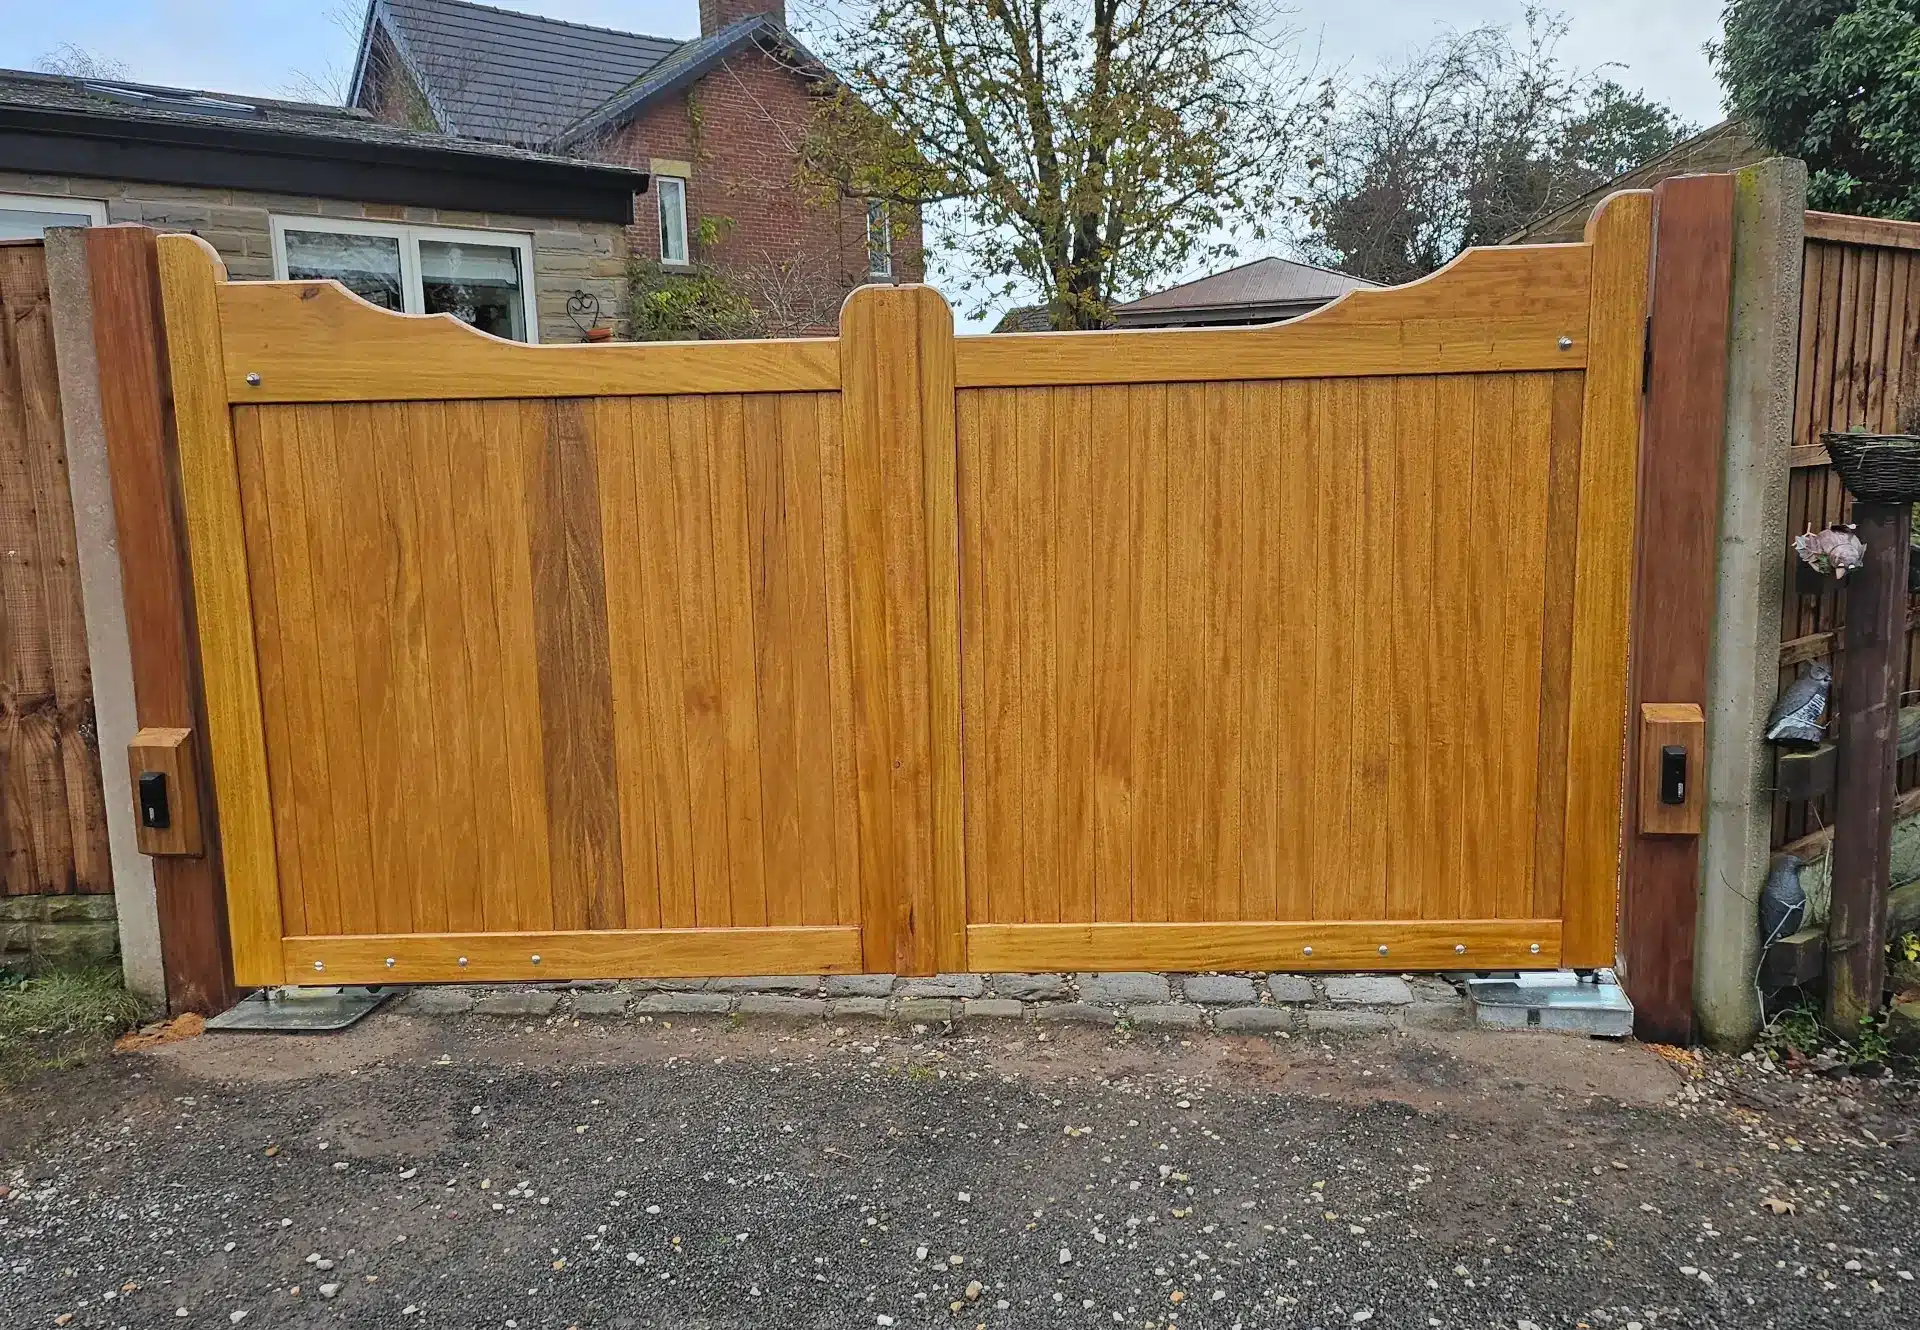 Link to our electric gates showing Gunstock driveway gates made from hardwood